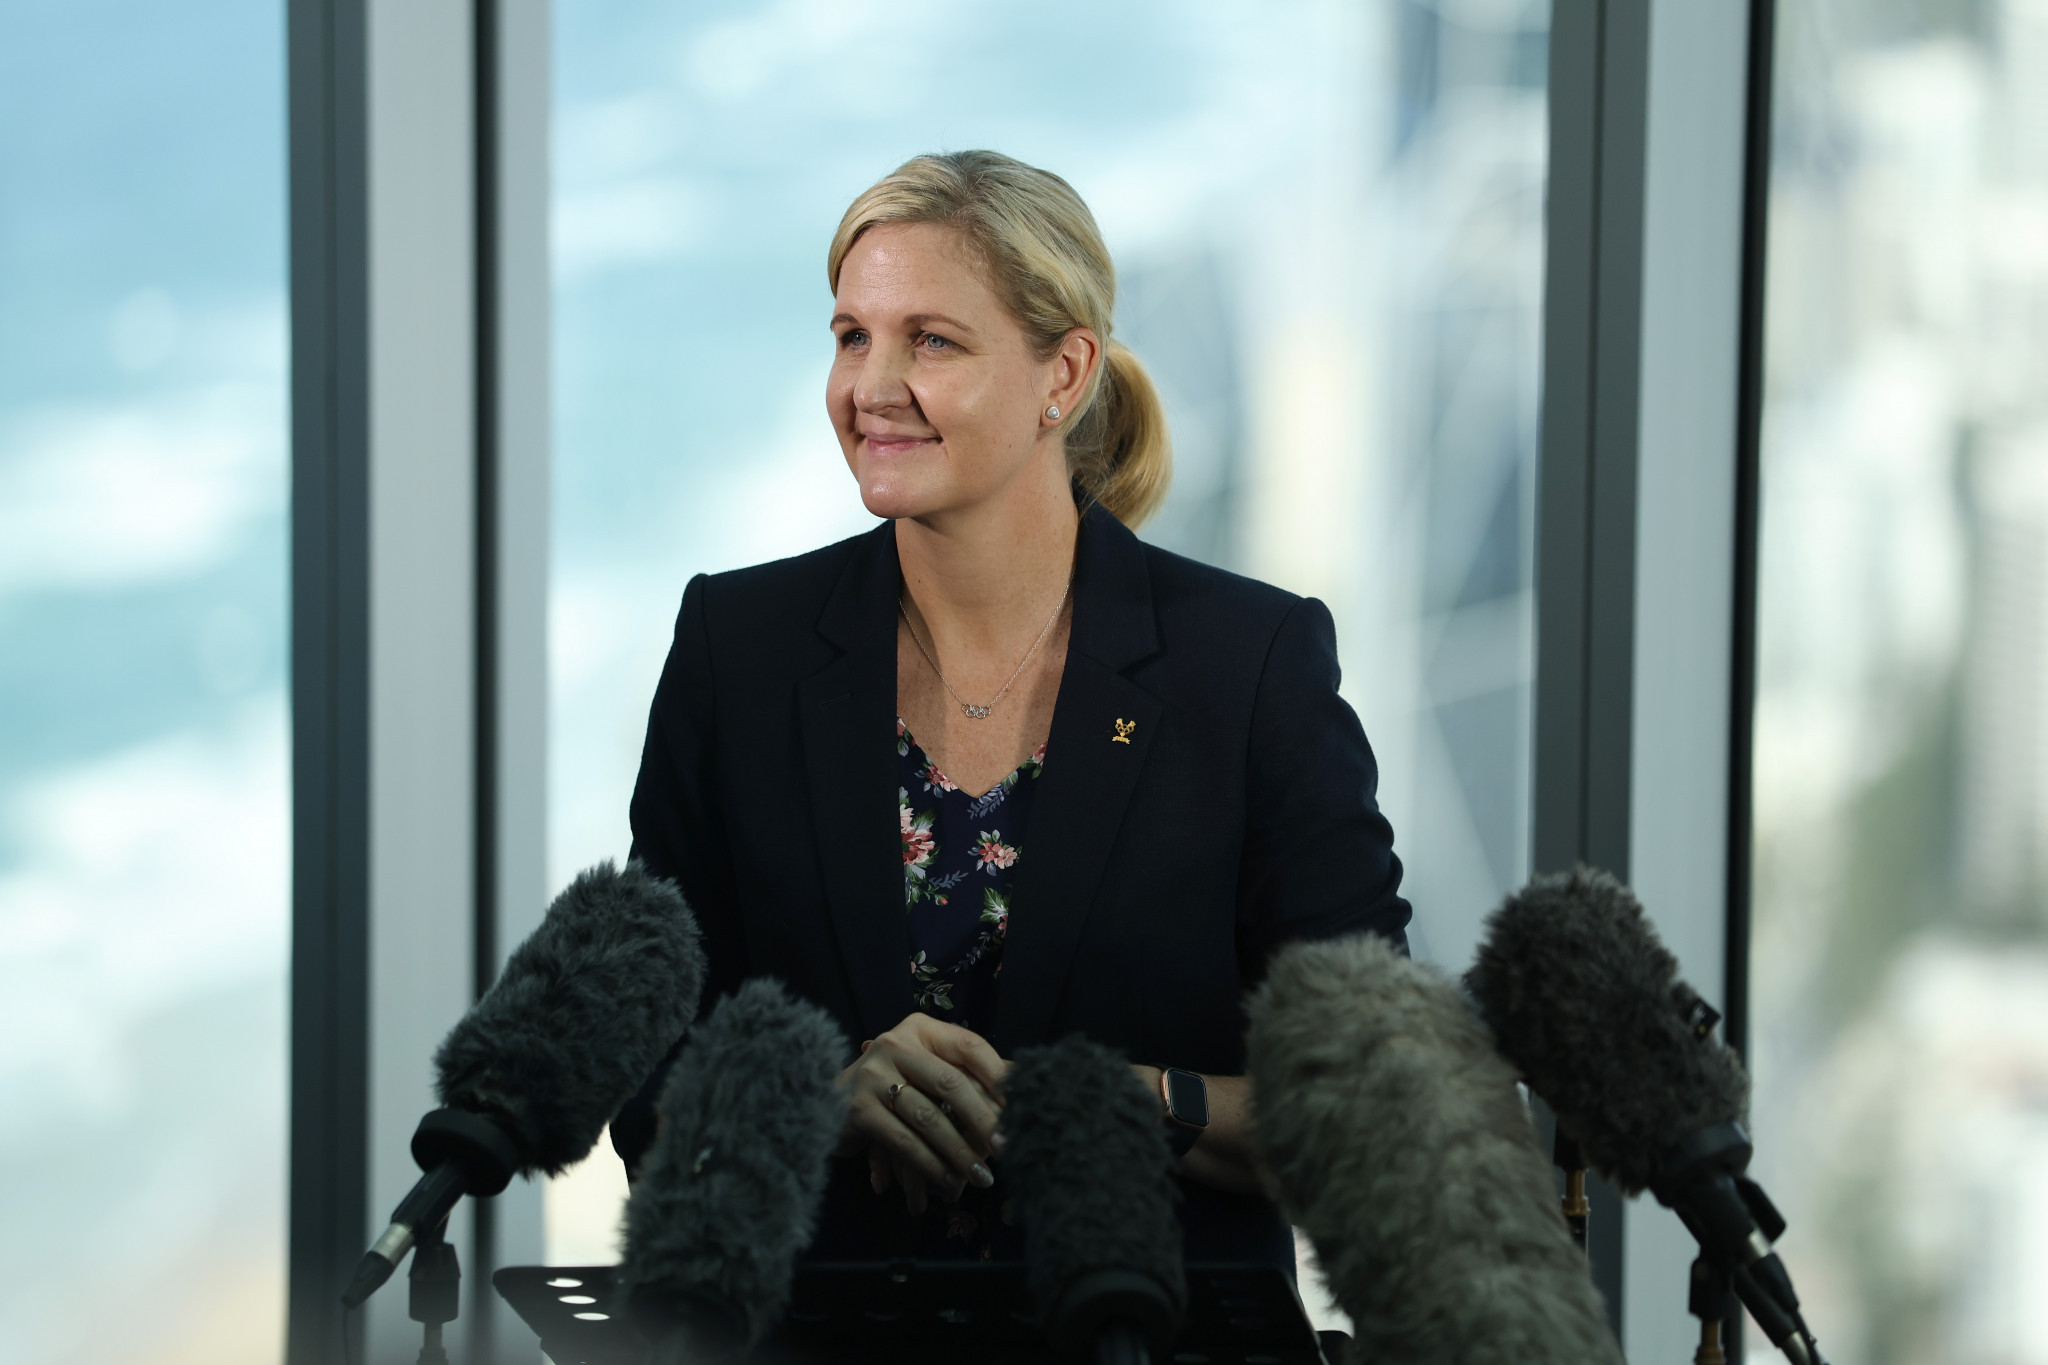 Former swimmer and Olympic champion Kirsty Coventry chairs the Brisbane 2032 Coordination Commission  ©Getty Images